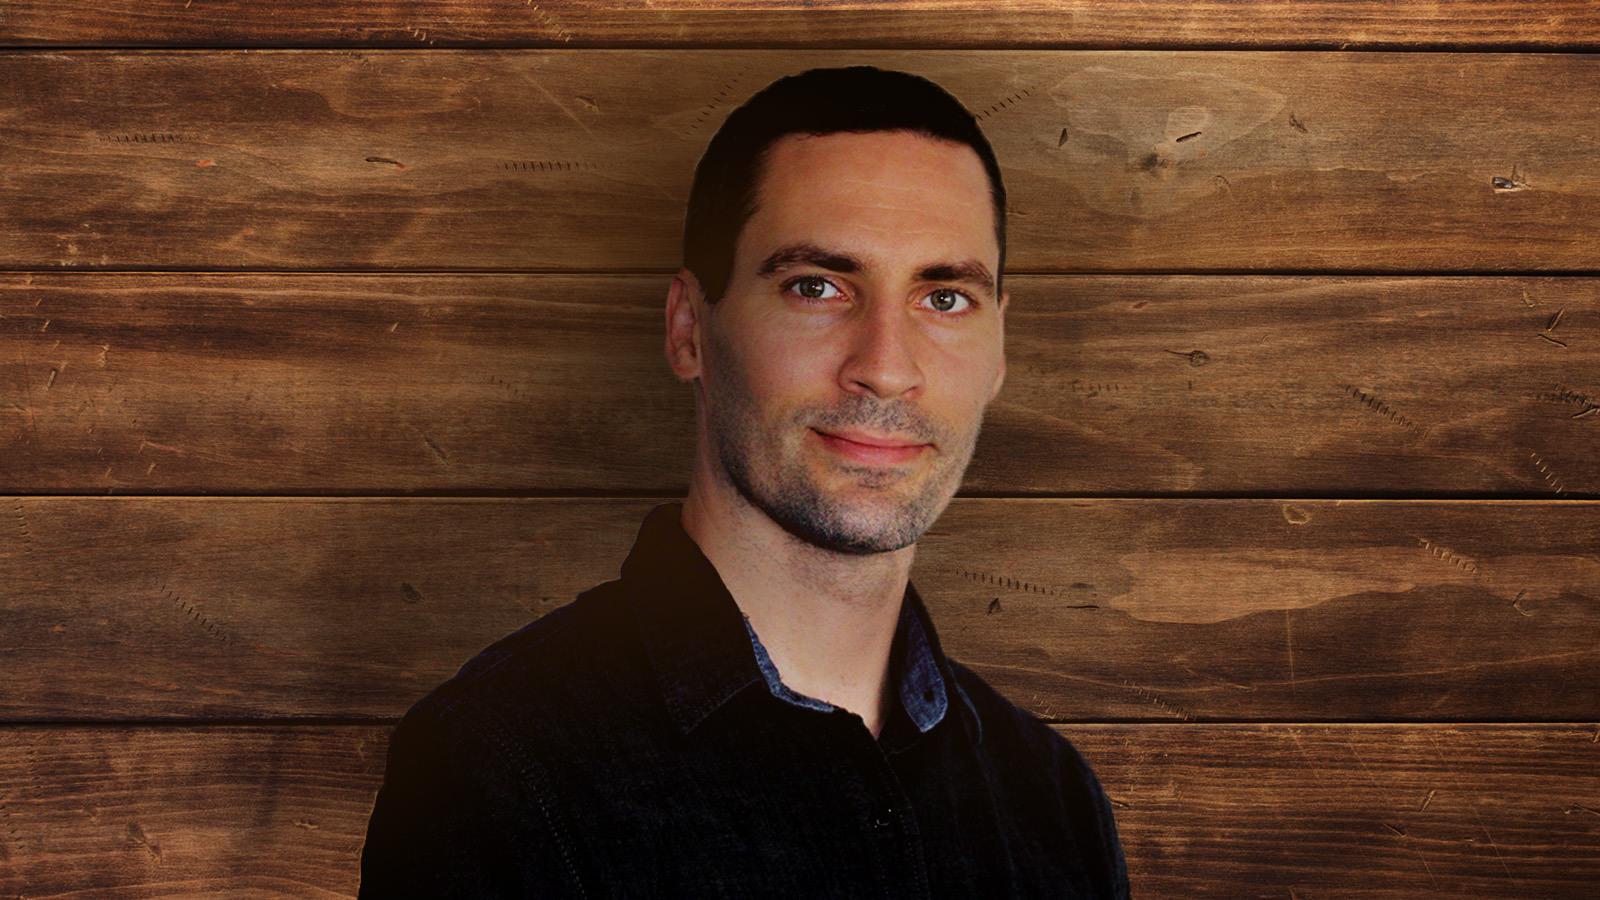 Justin Hosie standing in front of a paneled wood background. He is wearing a dark denim shirt and gently smiling.